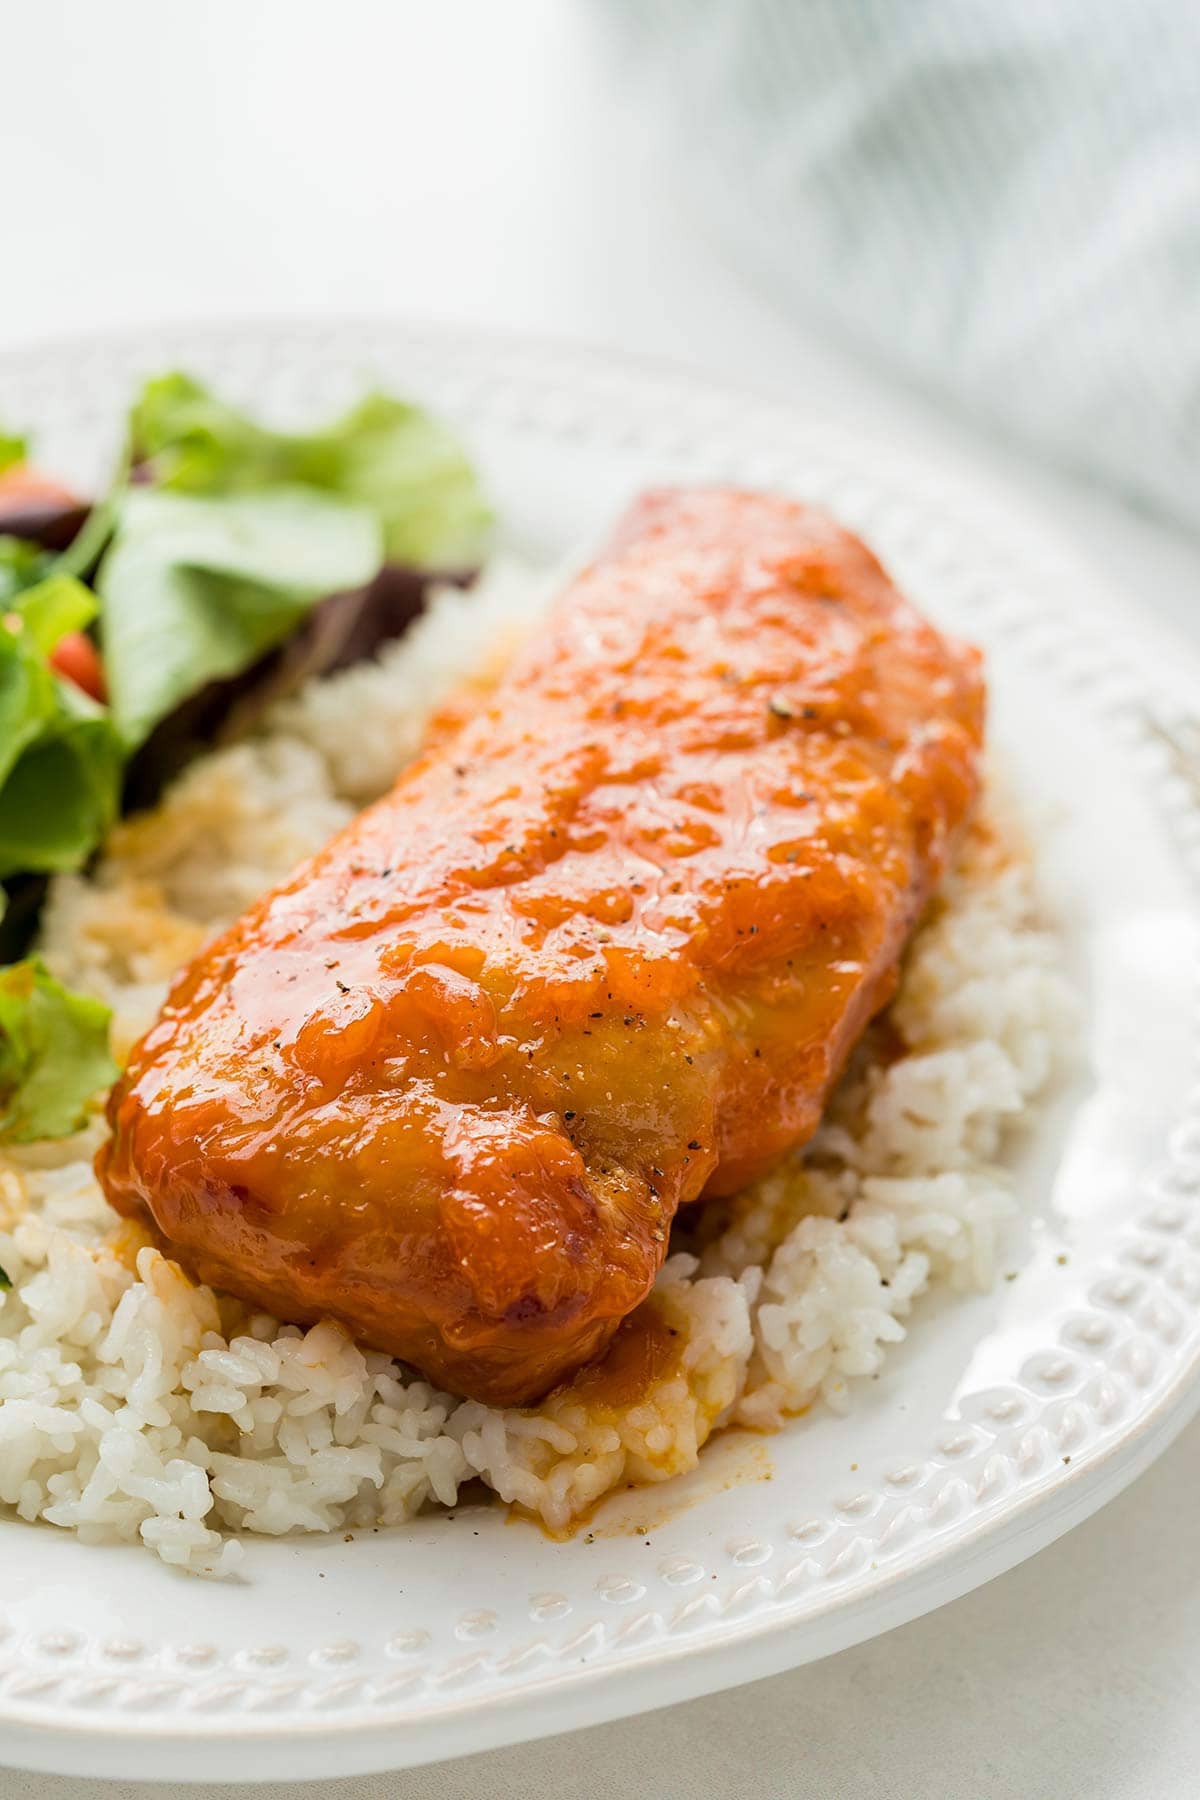 Slow Cooker Apricot Chicken on a bed of rice with a green salad.